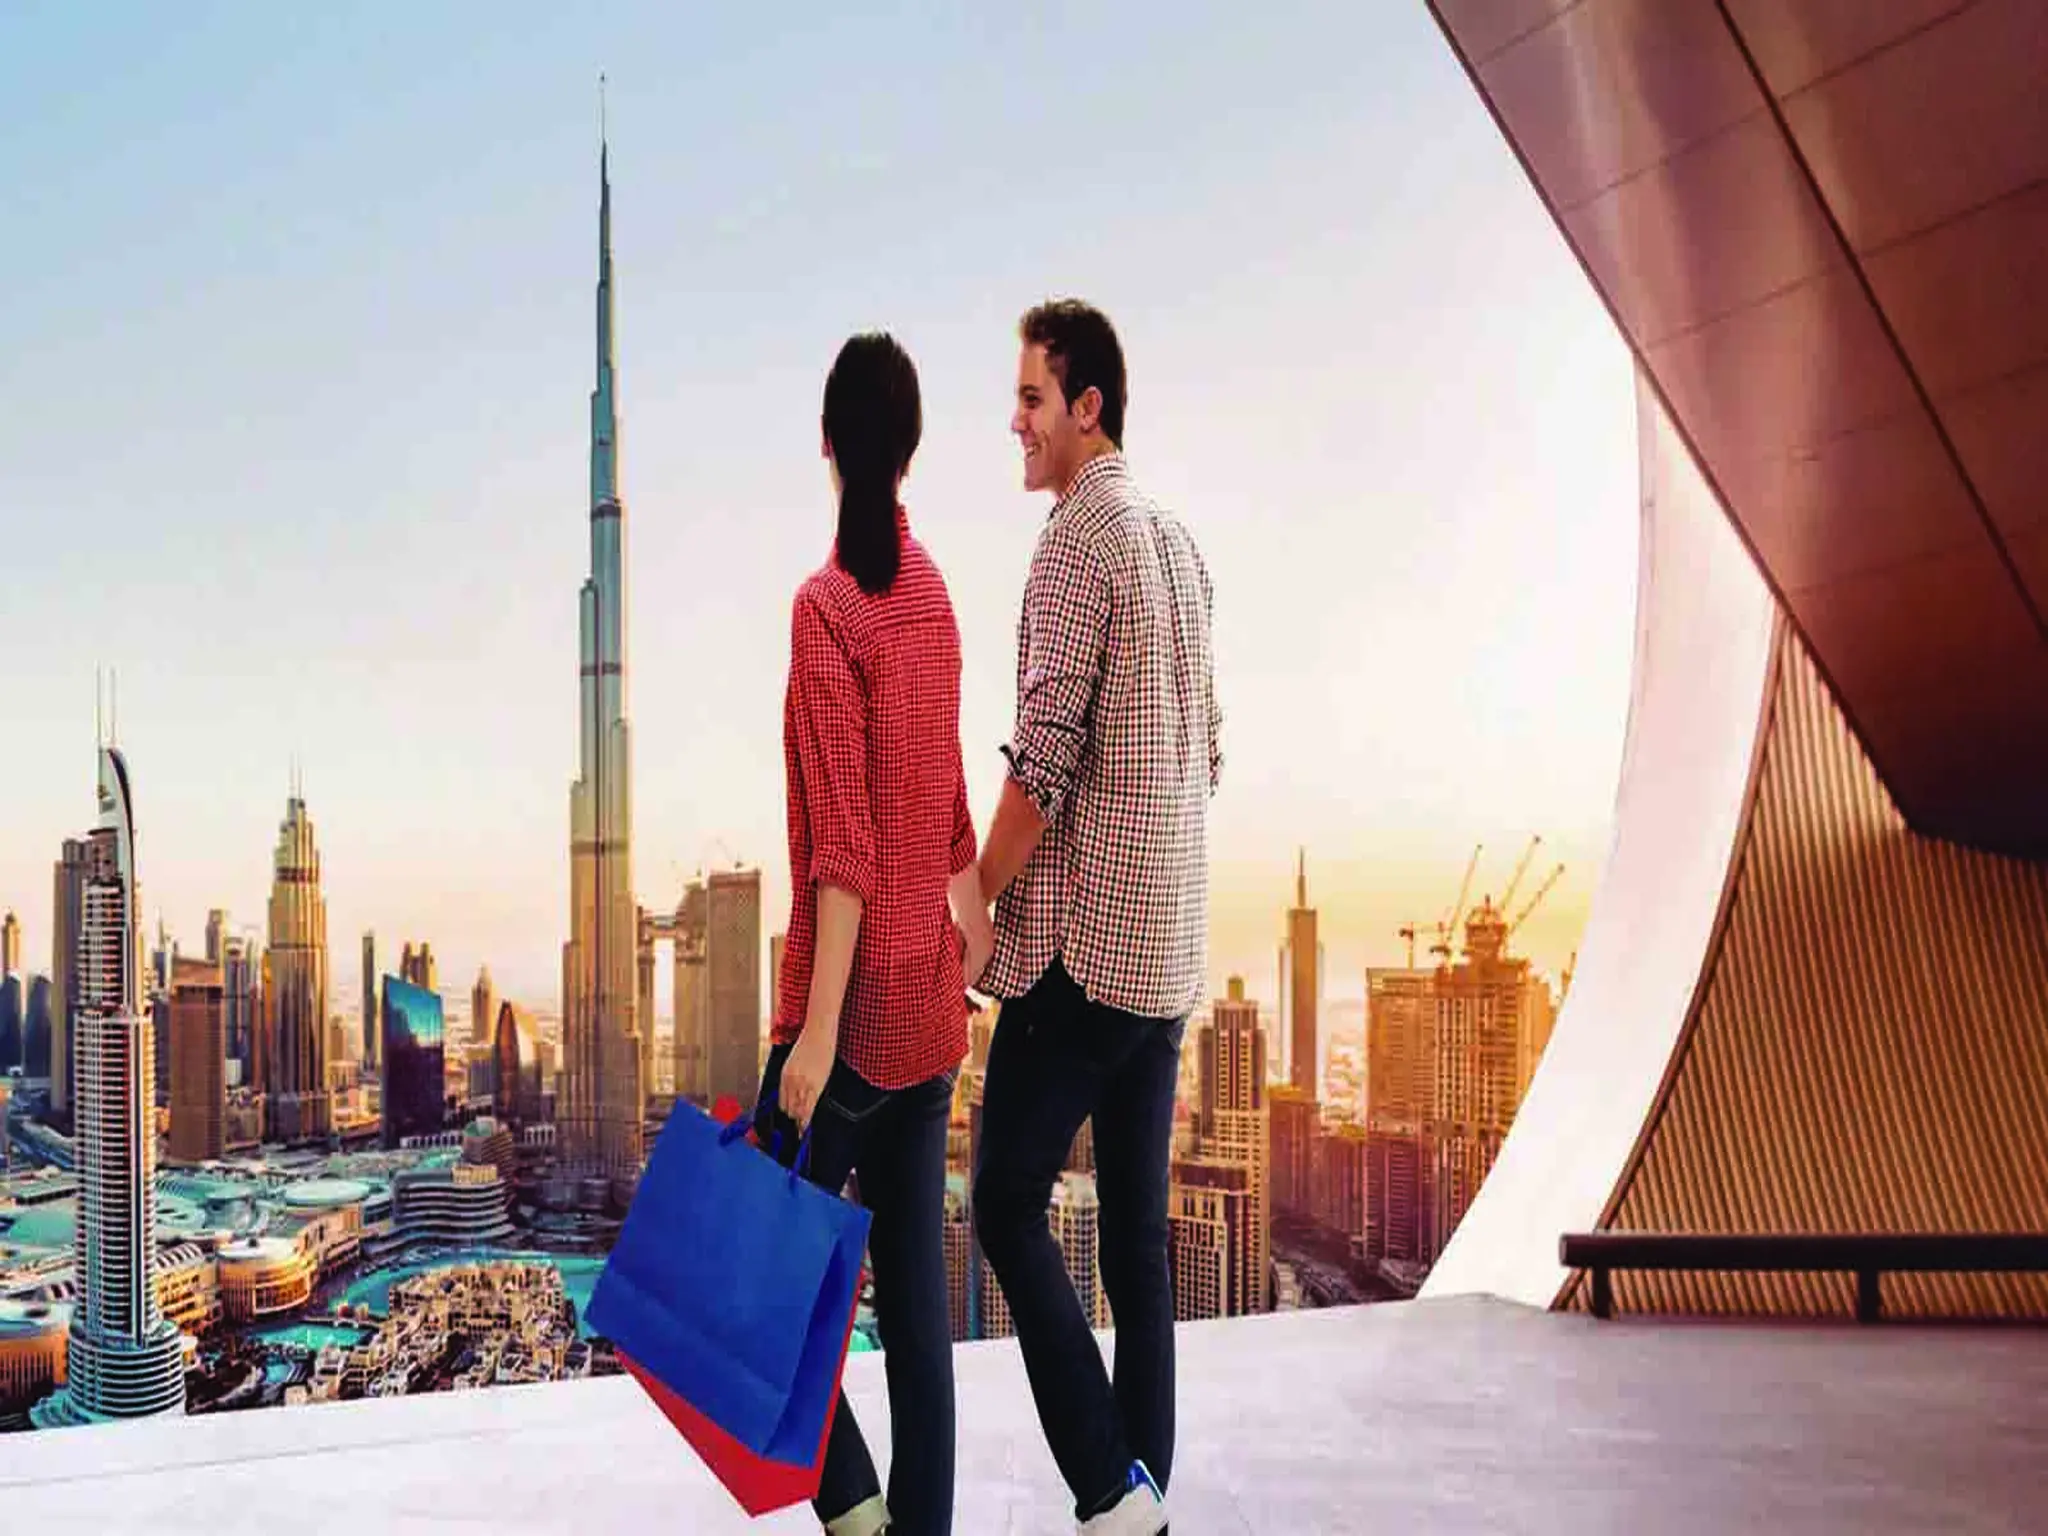 The UAE issues a decision regarding the duration and cost of obtaining a family residency visa